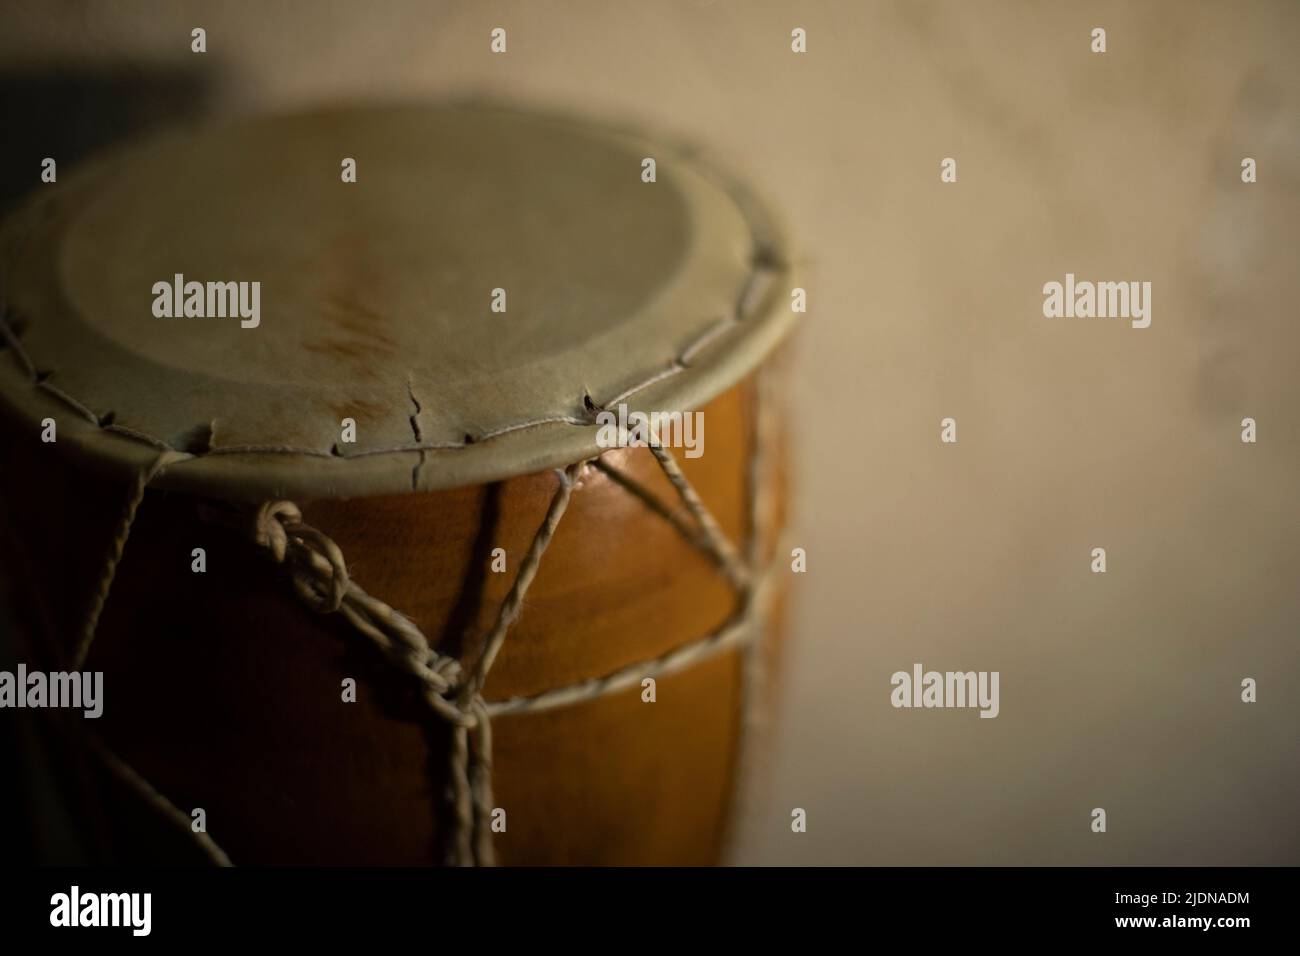 African drum. Acoustic instrument. Shock intrusion at home. Brown tree. Ropes and leather. Stock Photo